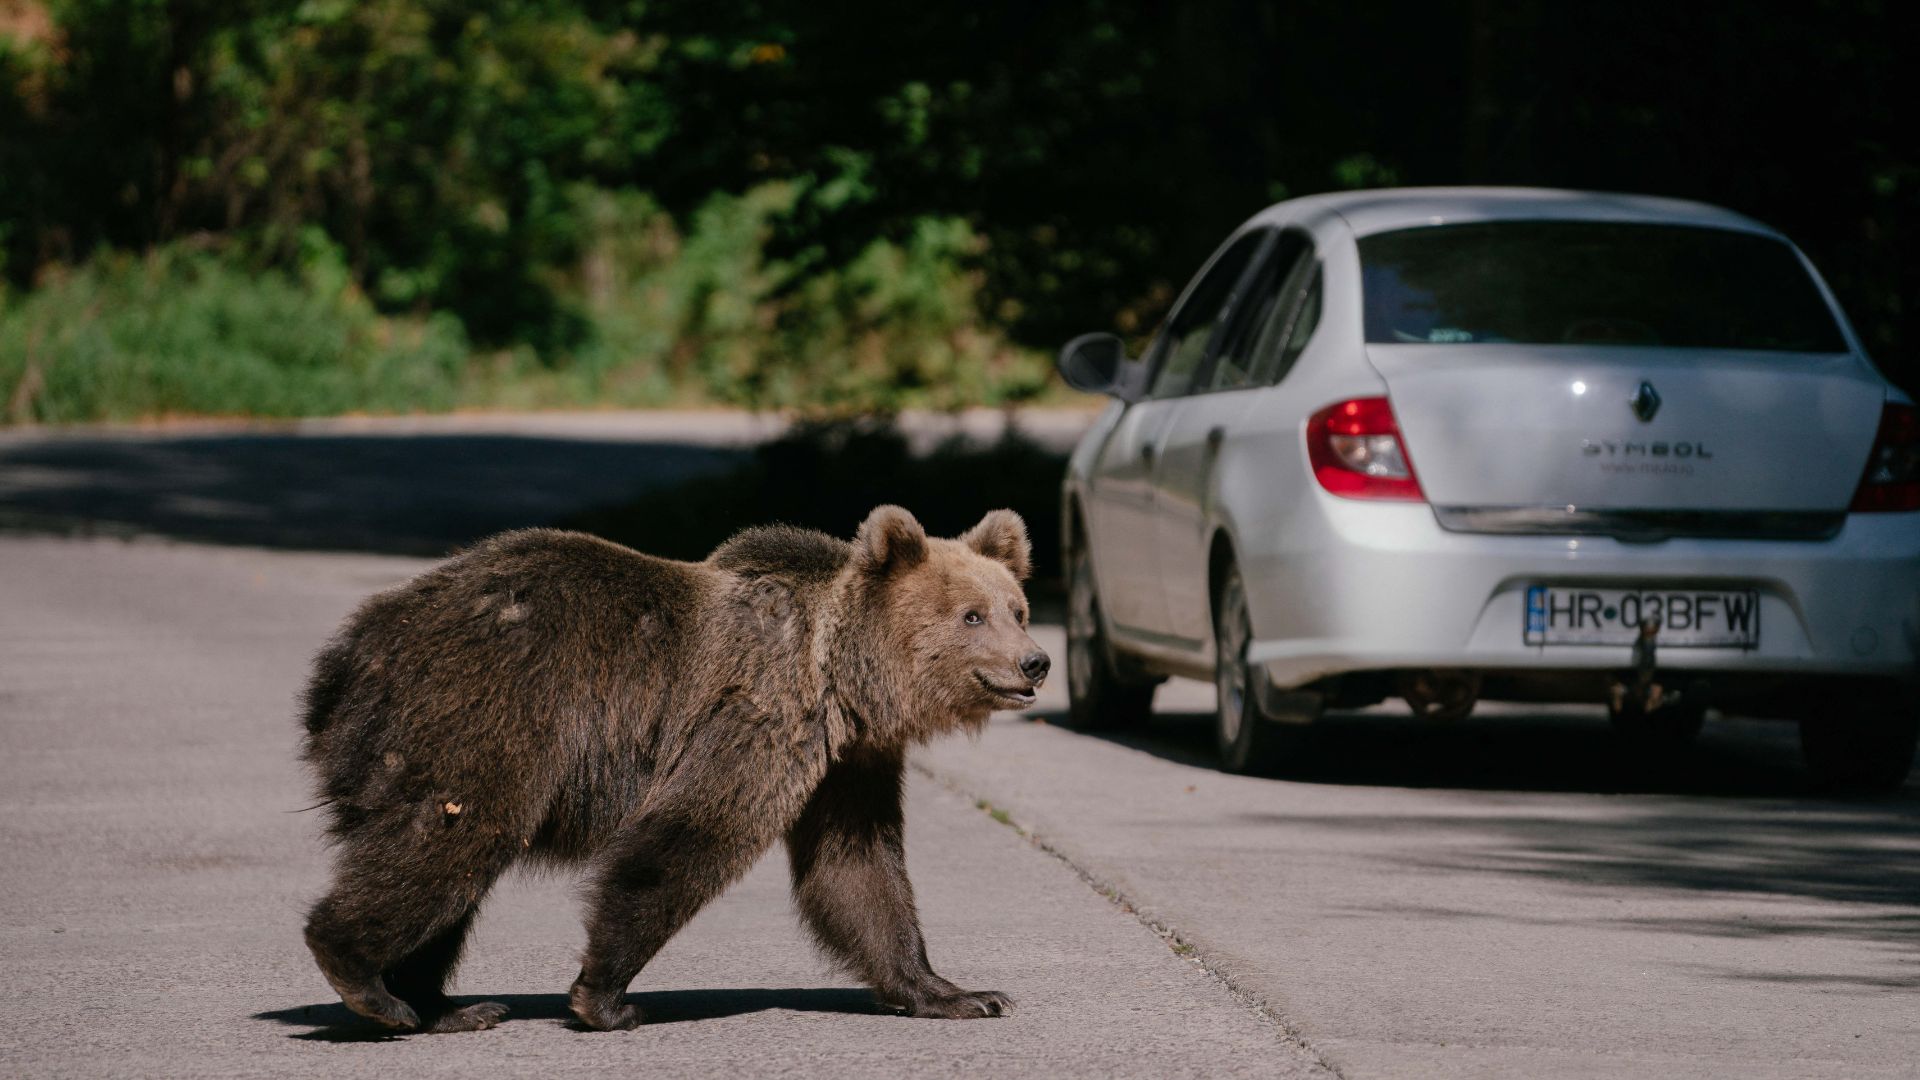 A bear waits for passing cars that might provide food in Covasna, Romania. /Andrei Pungovschi/AFP